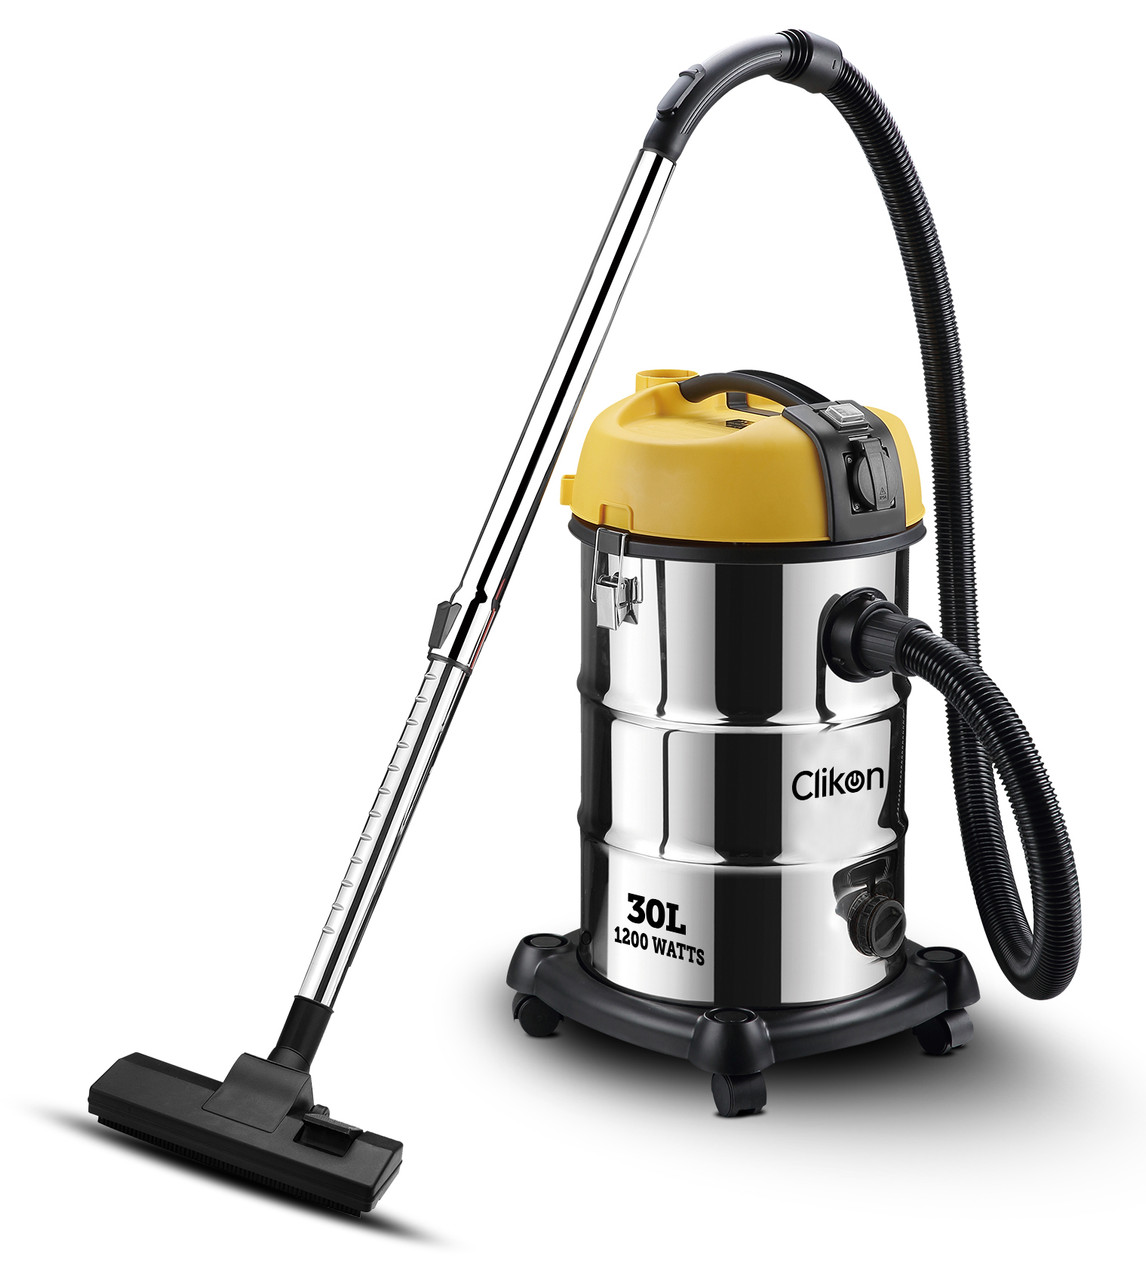 Clikon Wet And Dry Vacuum Cleaner 30L 2200Watts-Ck4445